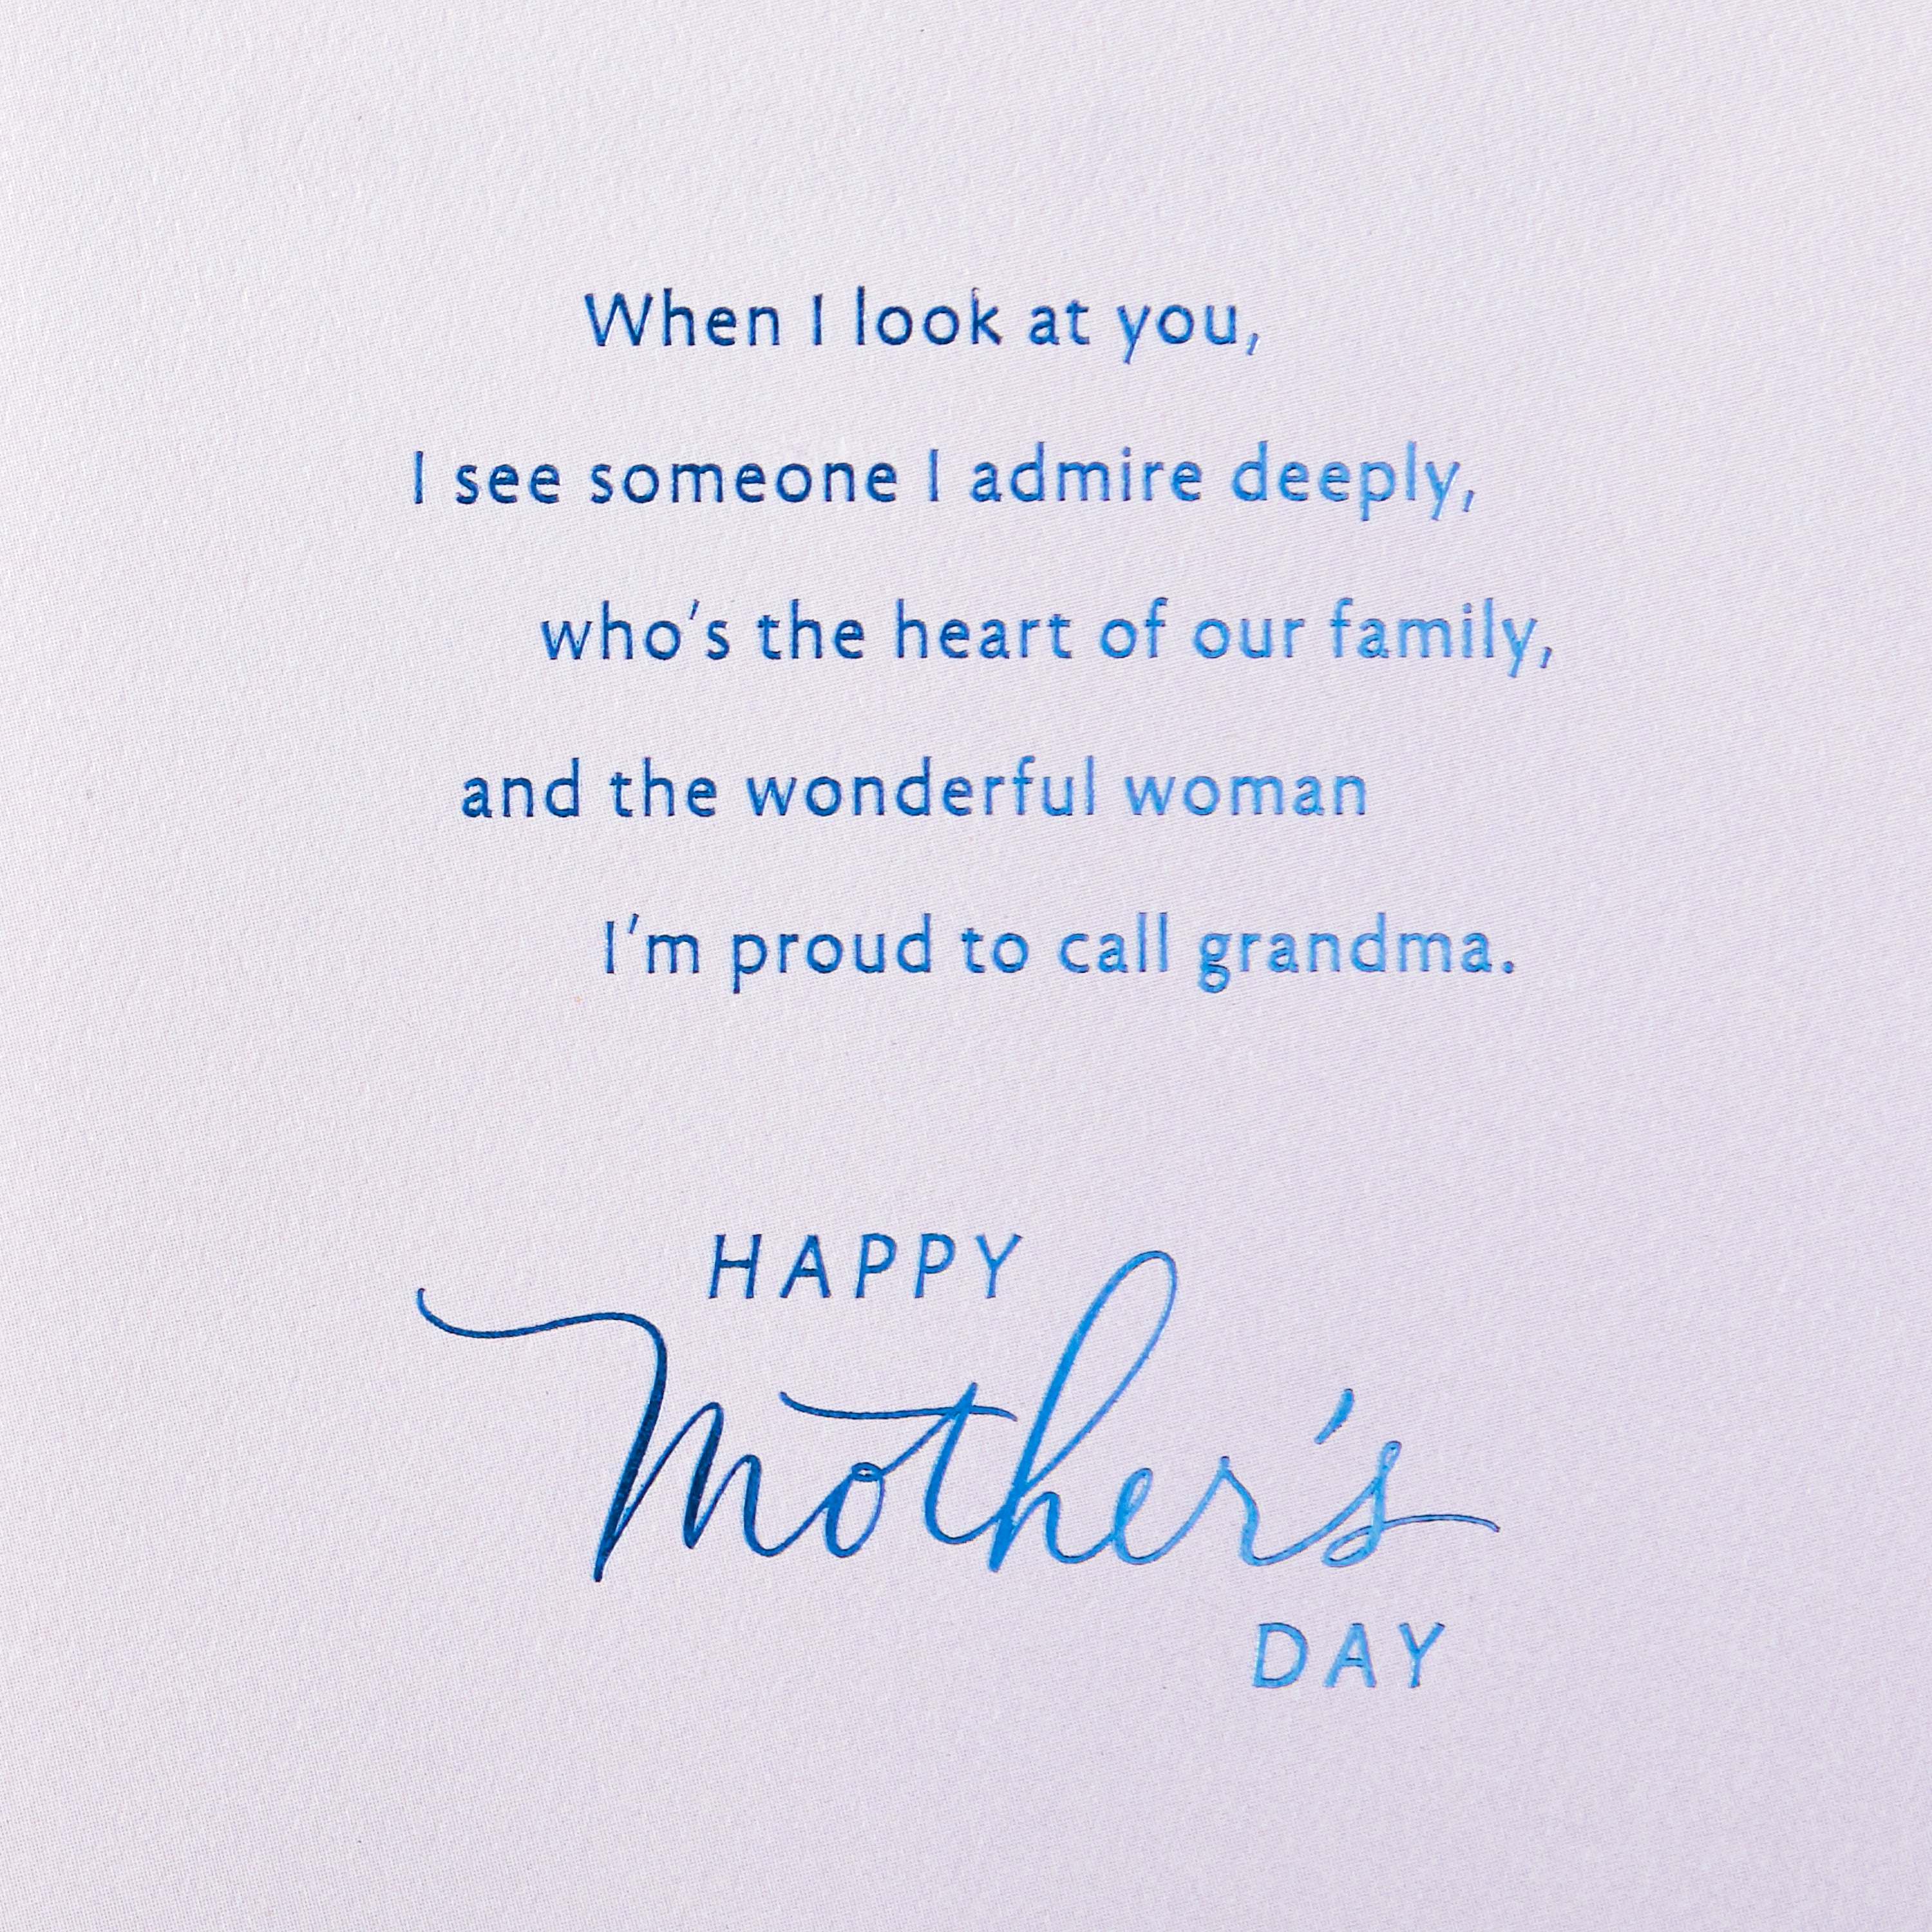 Mother's Day Card for Grandmother (Wonderful Woman)